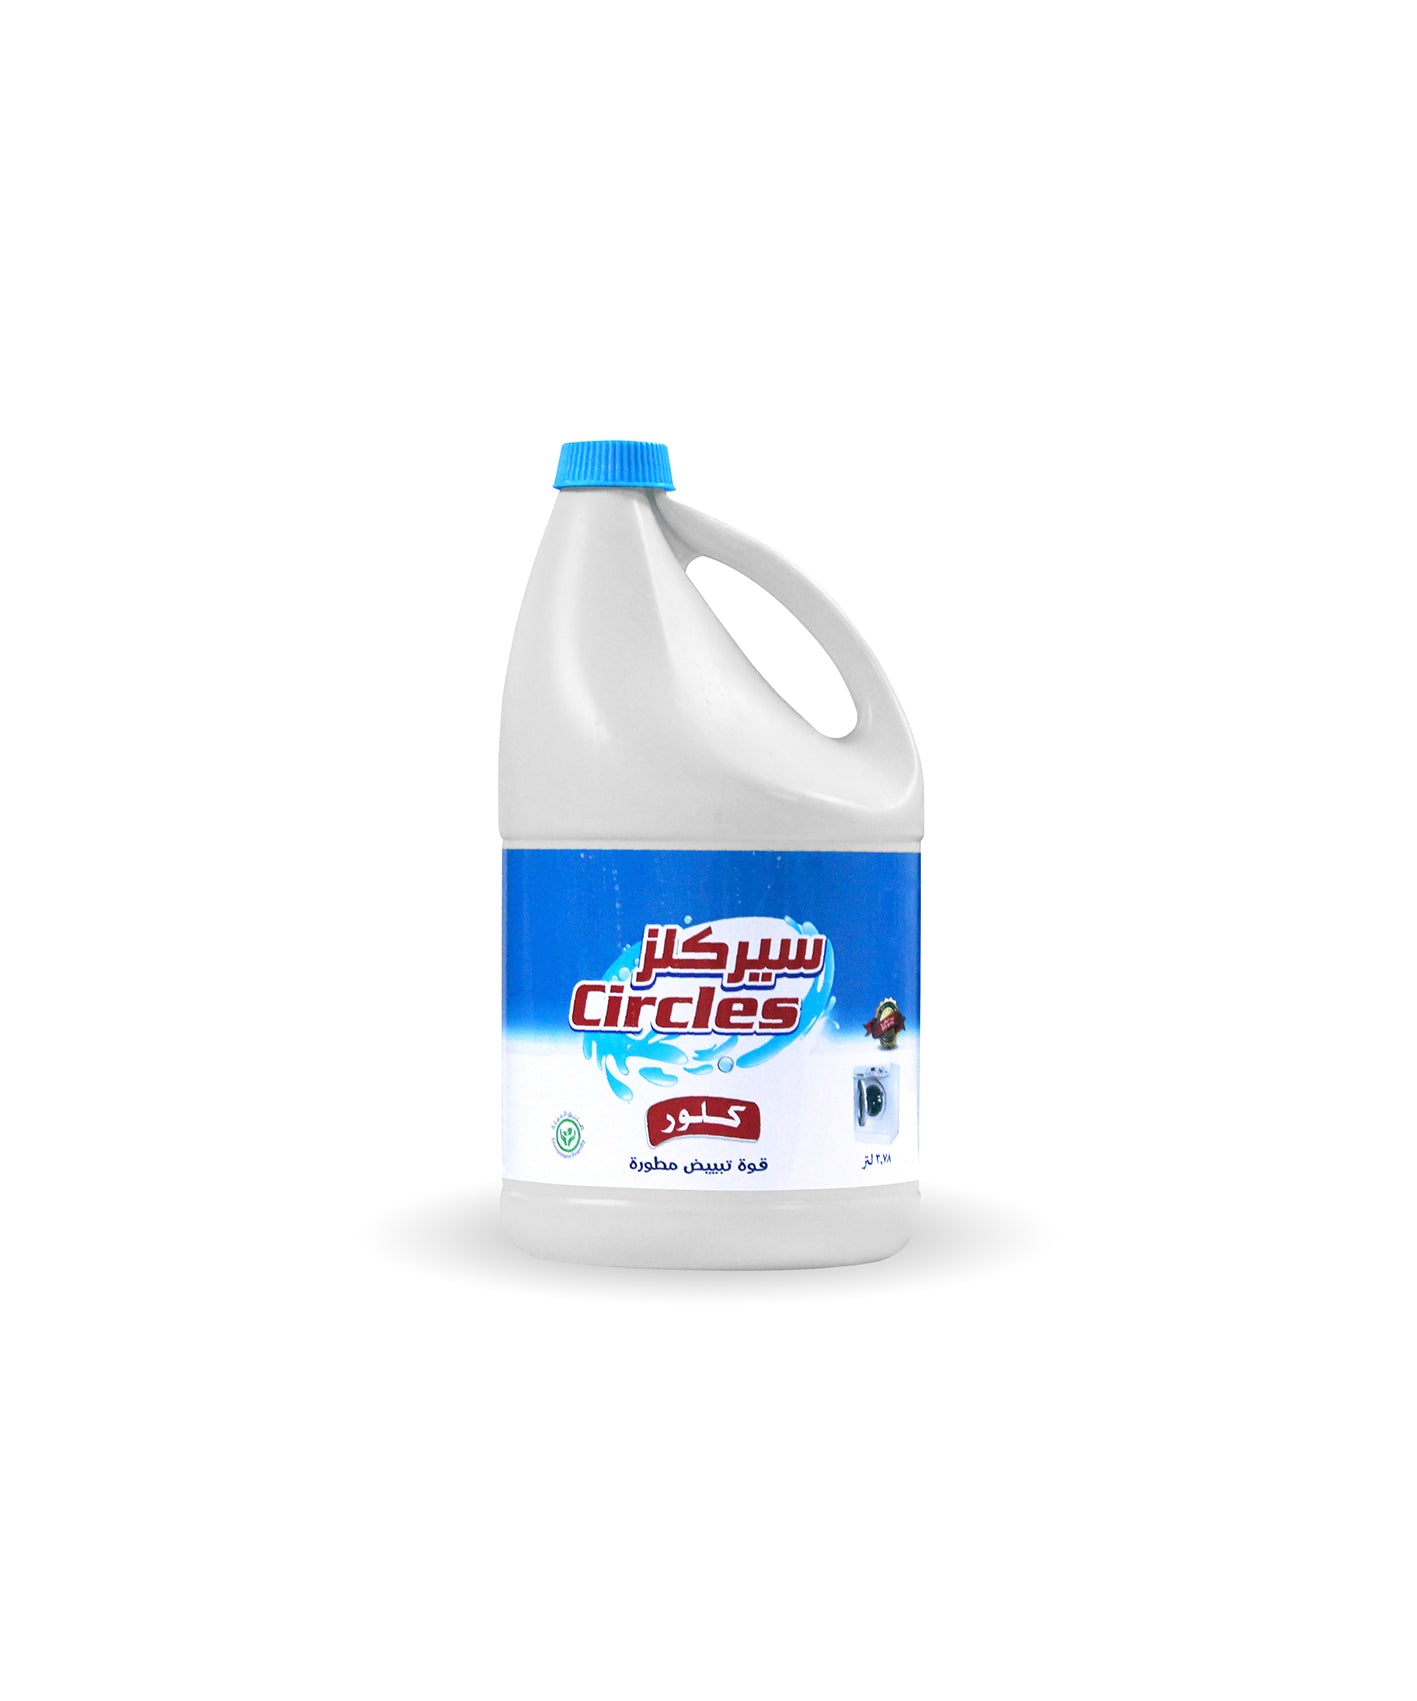 Circles laundry detergent powder for automatic washing machines, 10 kg